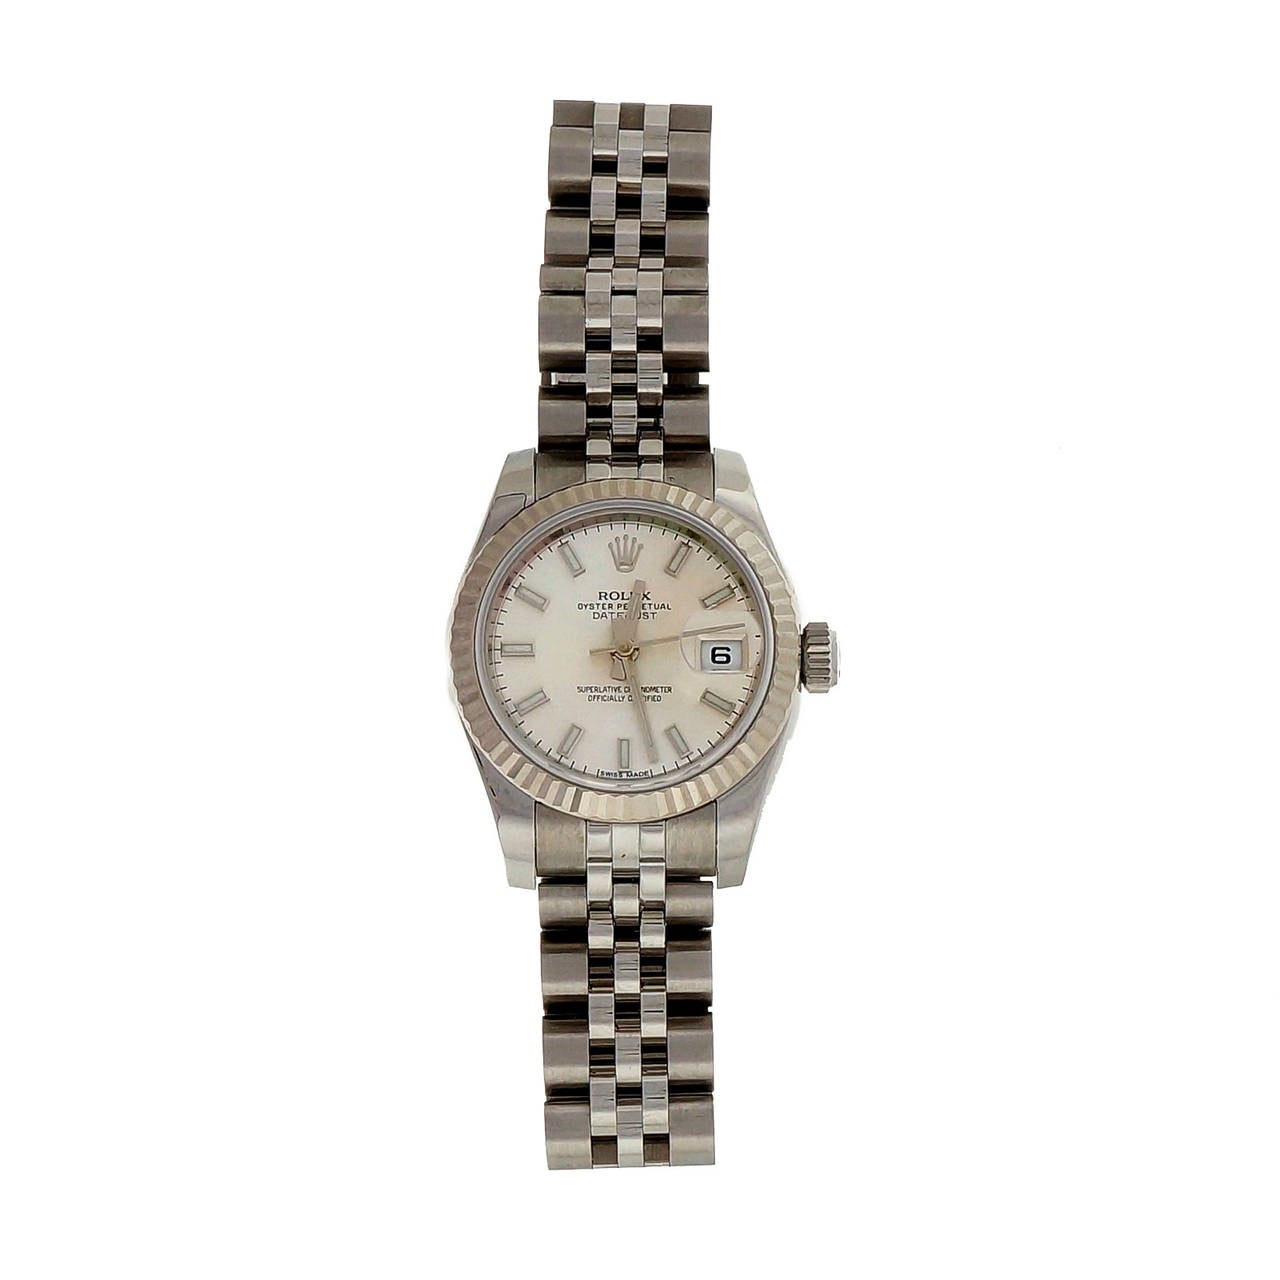 Ladies solid stainless steel Rolex Datejust wrist watch 179174, newest style with solid stainless band, silvered dial. Won as a business award. Never Worn. White gold bezel.

Steel
Length: 27.50mm
Width: 25.62mm
Band width at case: 13mm
Case